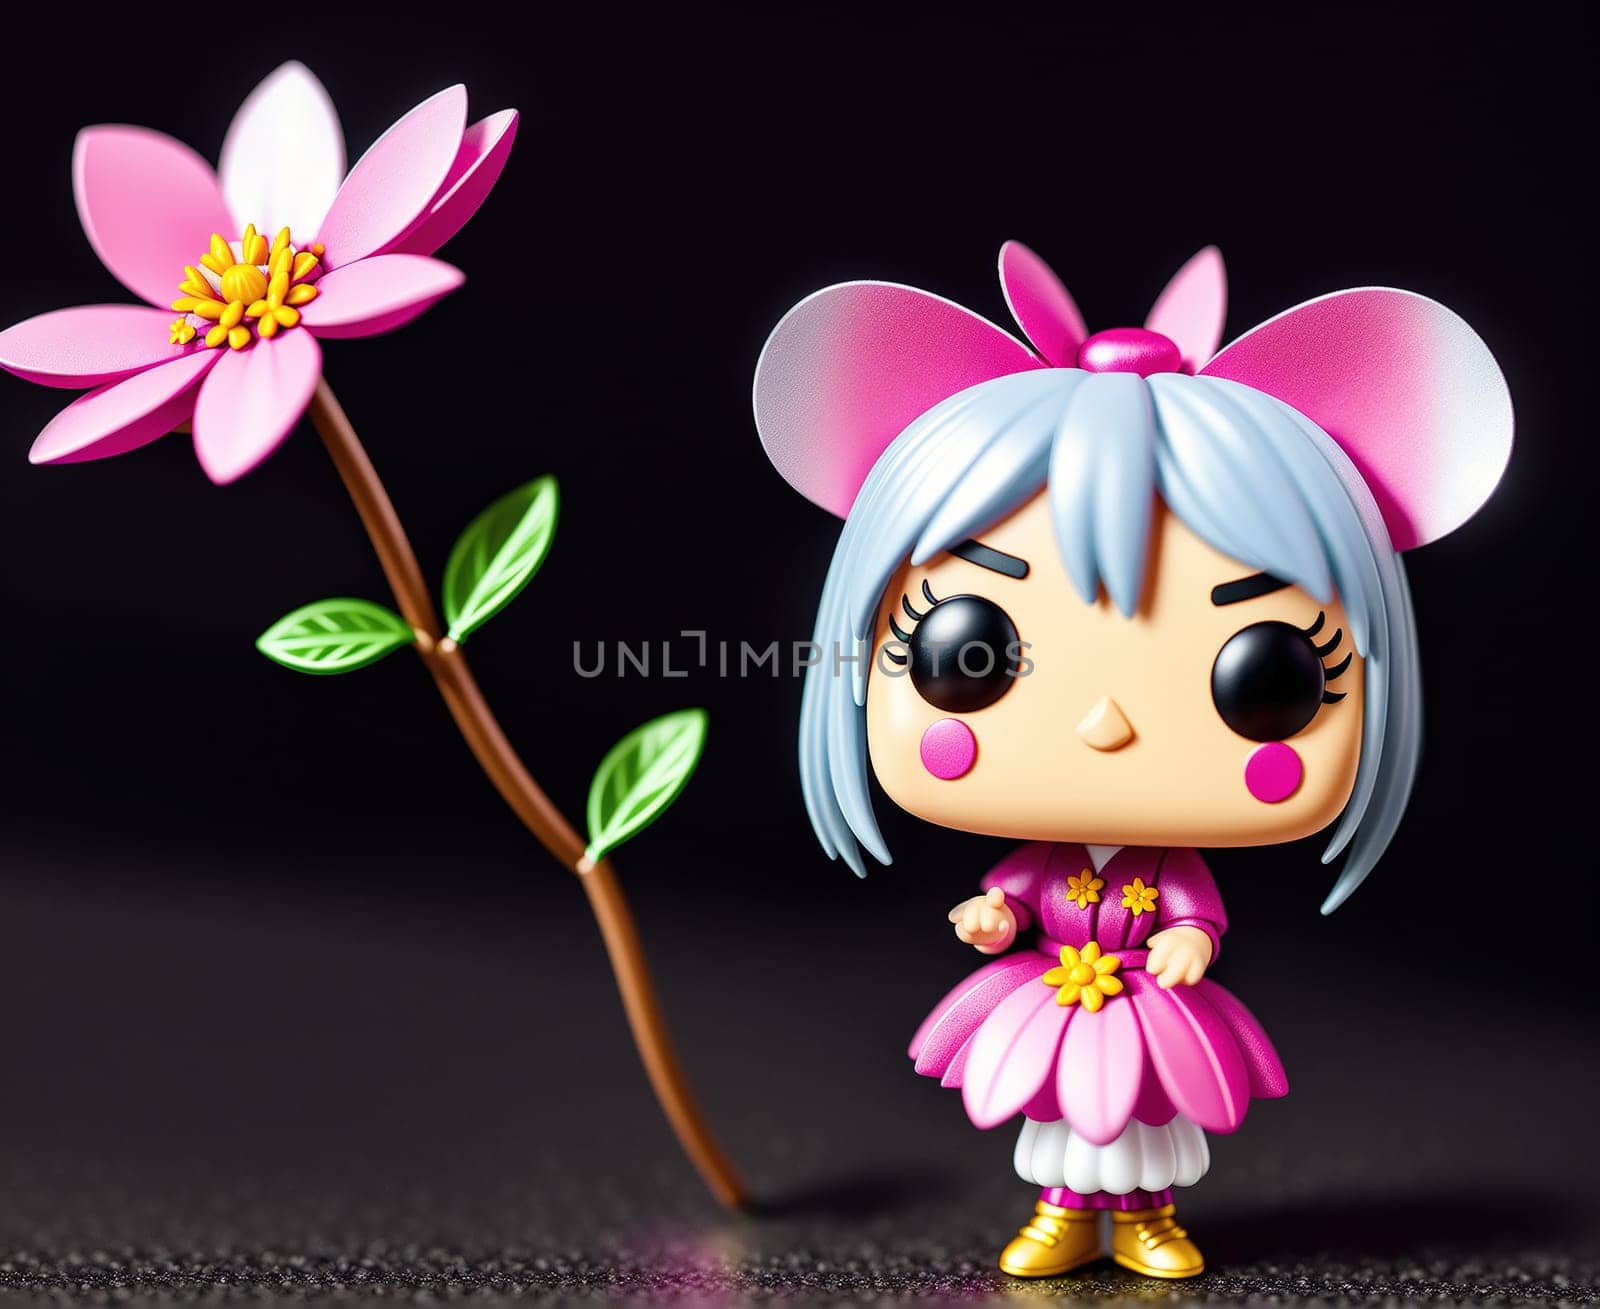 The image shows a cartoon character wearing a pink dress and holding a flower in her hand.